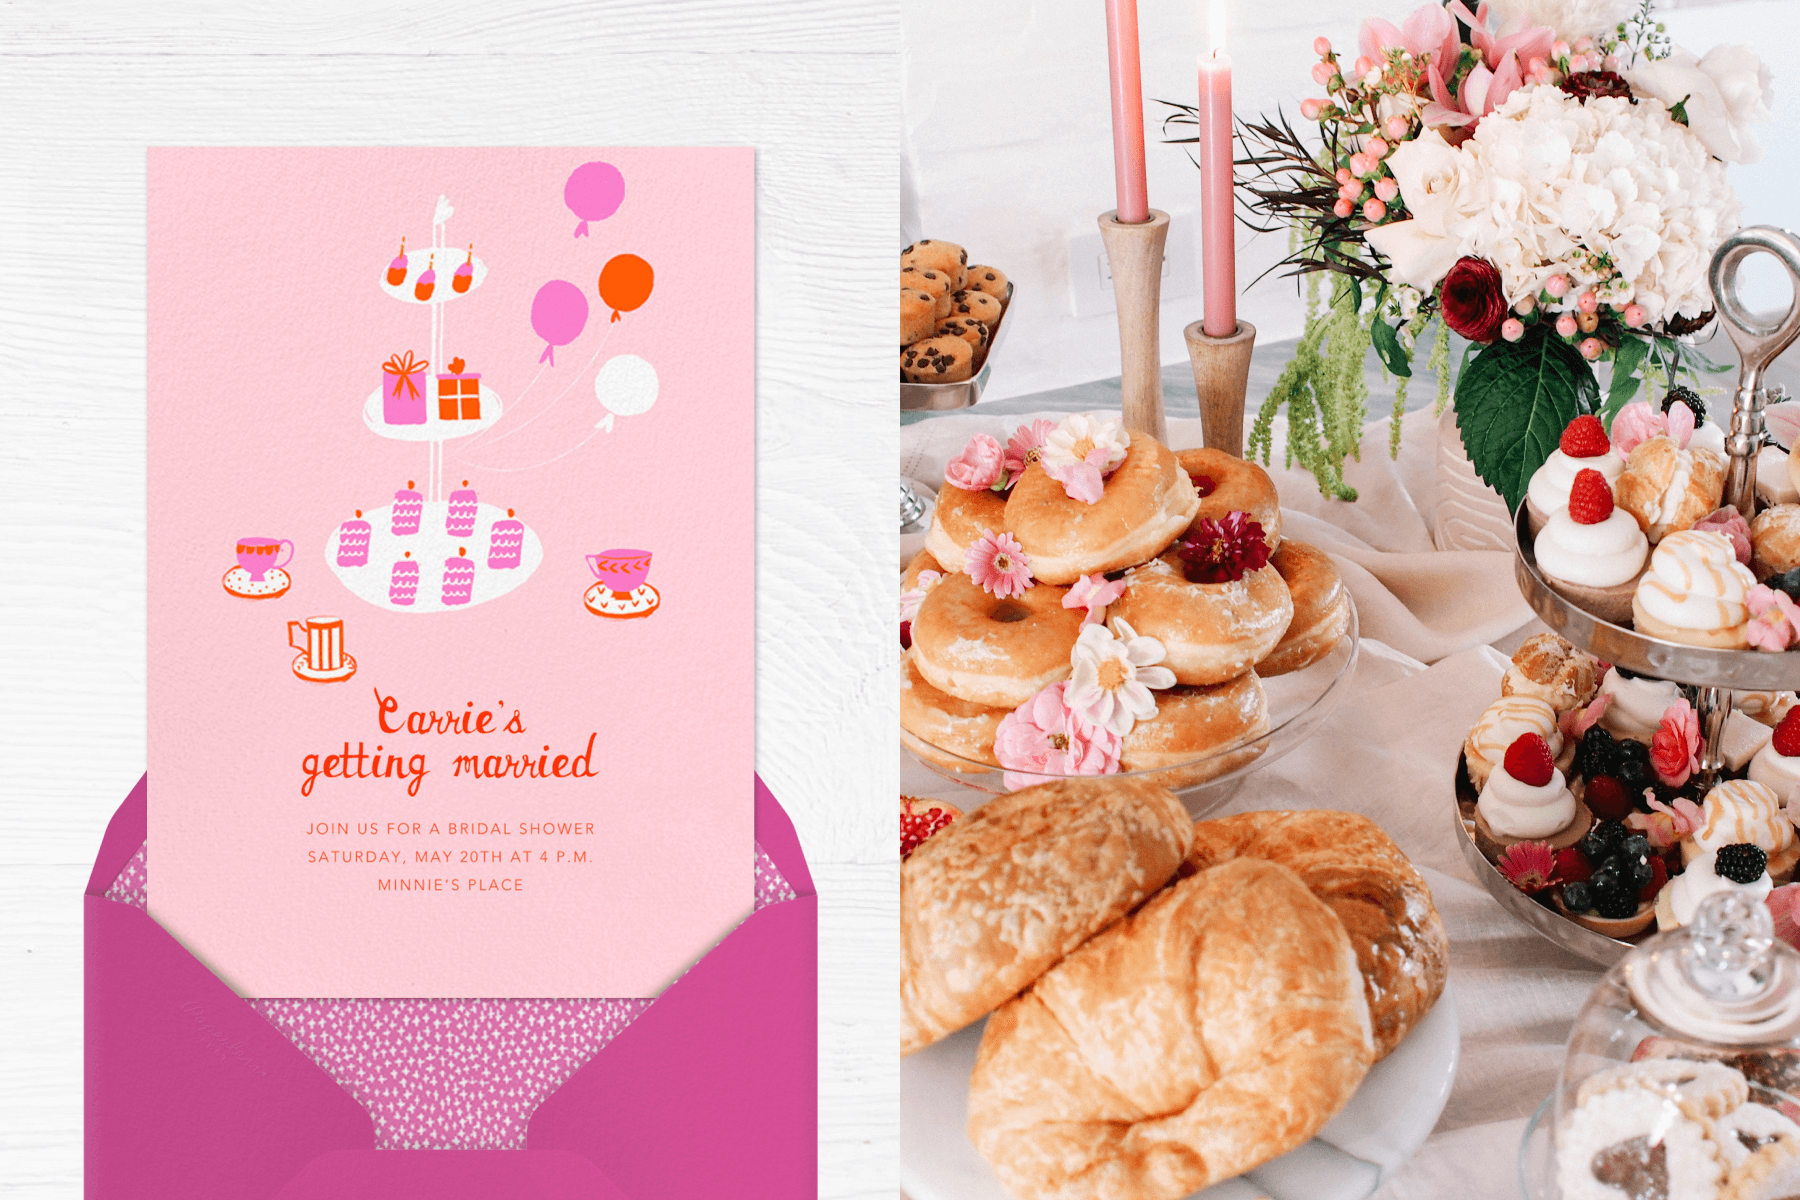 Left: A pink bridal shower invitation with simplified illustrations of a multi-tier cake stand, party balloons, and patterned tea cups and saucers. Right: A tabletop piled with tea party-type pastries, such as croissants, doughnuts, and mini cupcakes, and pink taper candles and a flower arrangement.